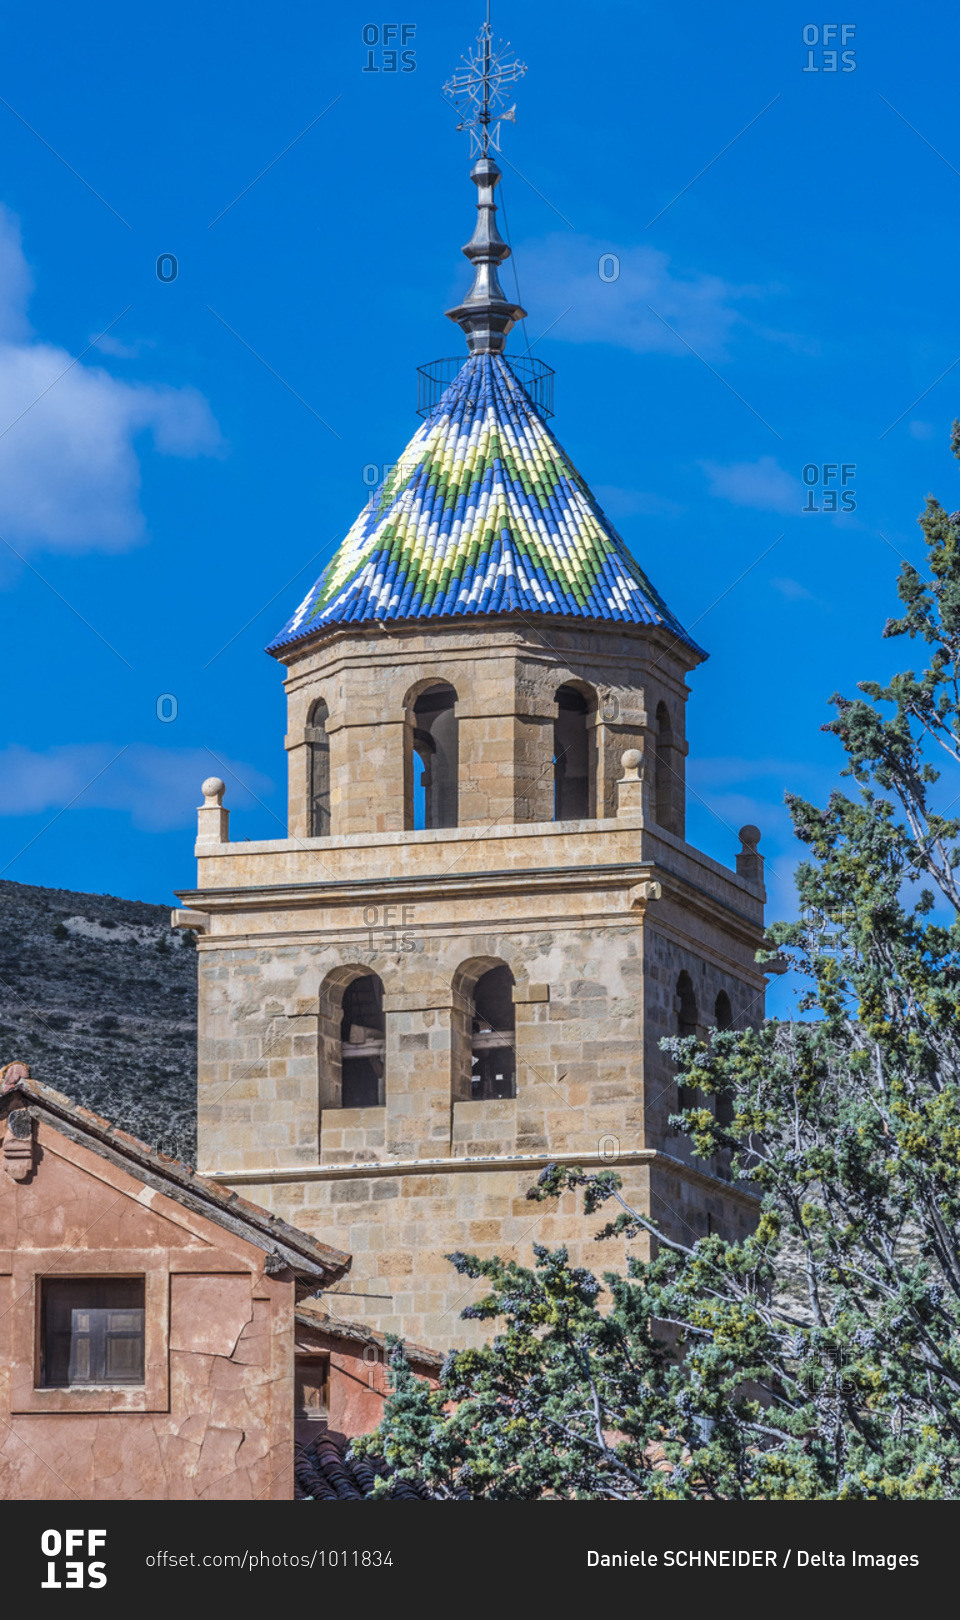 Spain, autonomous community of Aragon, Province of Teruel, Albarracin vilage (Most Beautiful Village in Spain), bell tower of the cathedral (16th century)